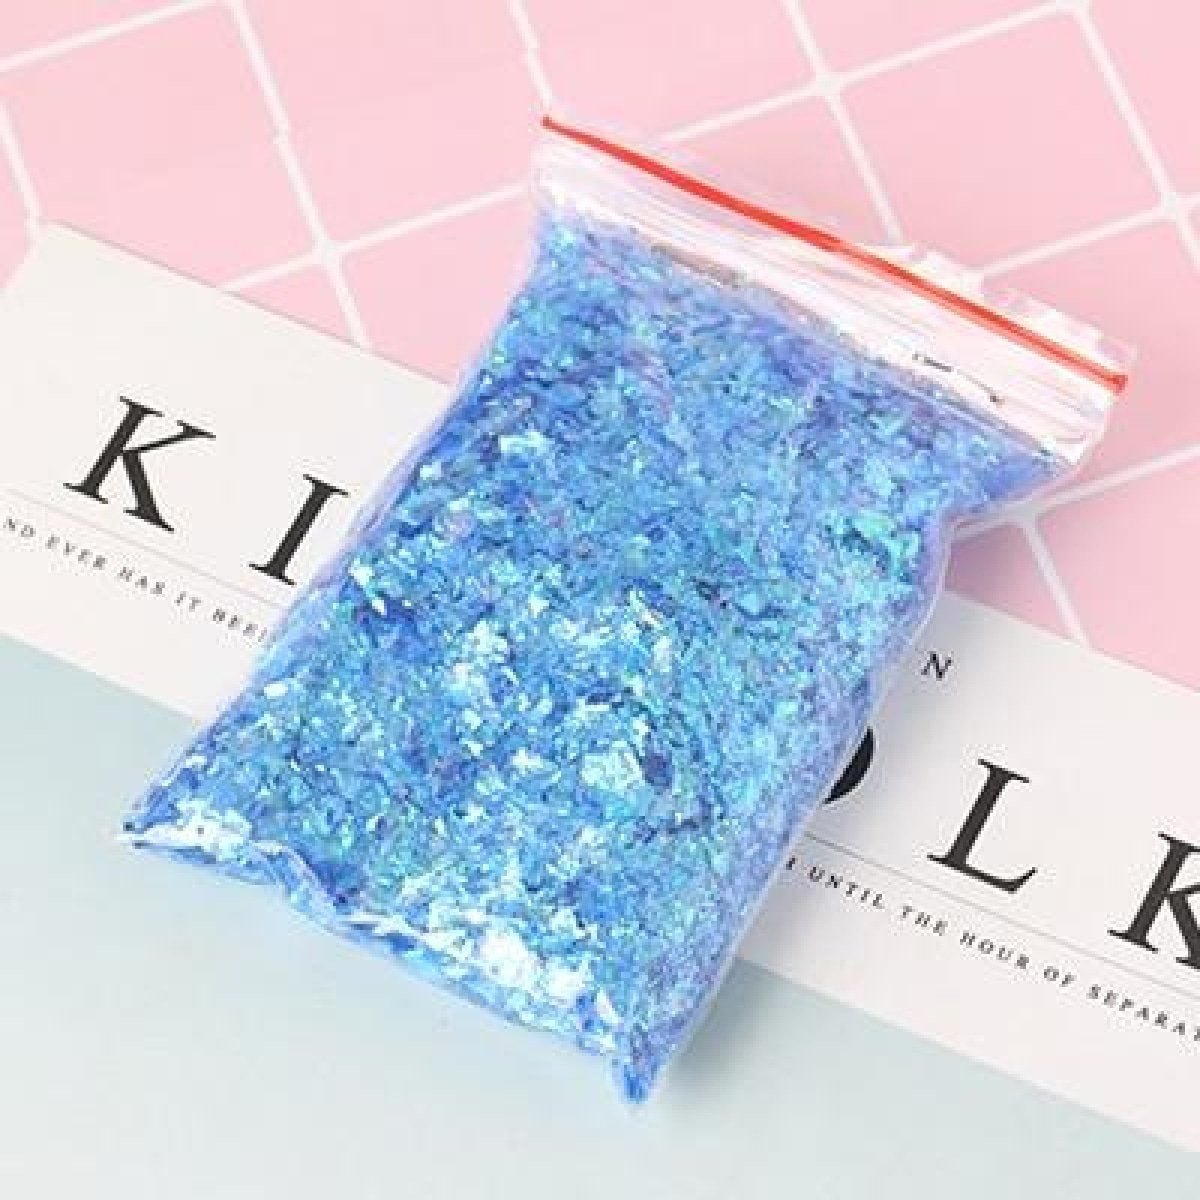 100g Holographic Nail Decoration Flakes Glitter DIY Nail Art 3D Sequin - Orange/Pink - - Asia Sell